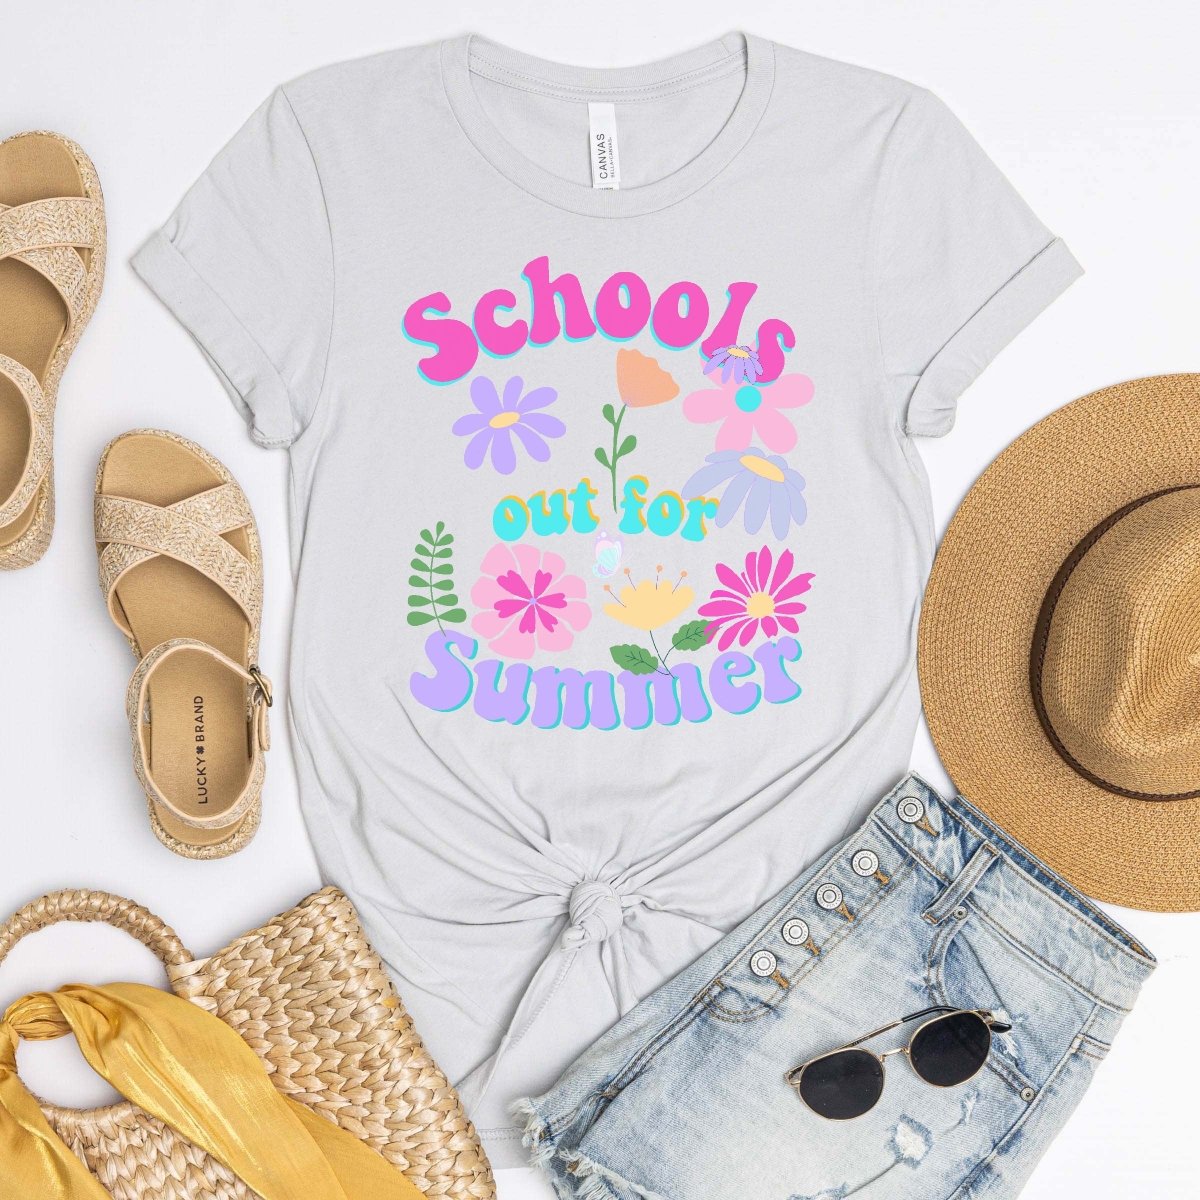 Schools out for Summer Tee - Limeberry Designs